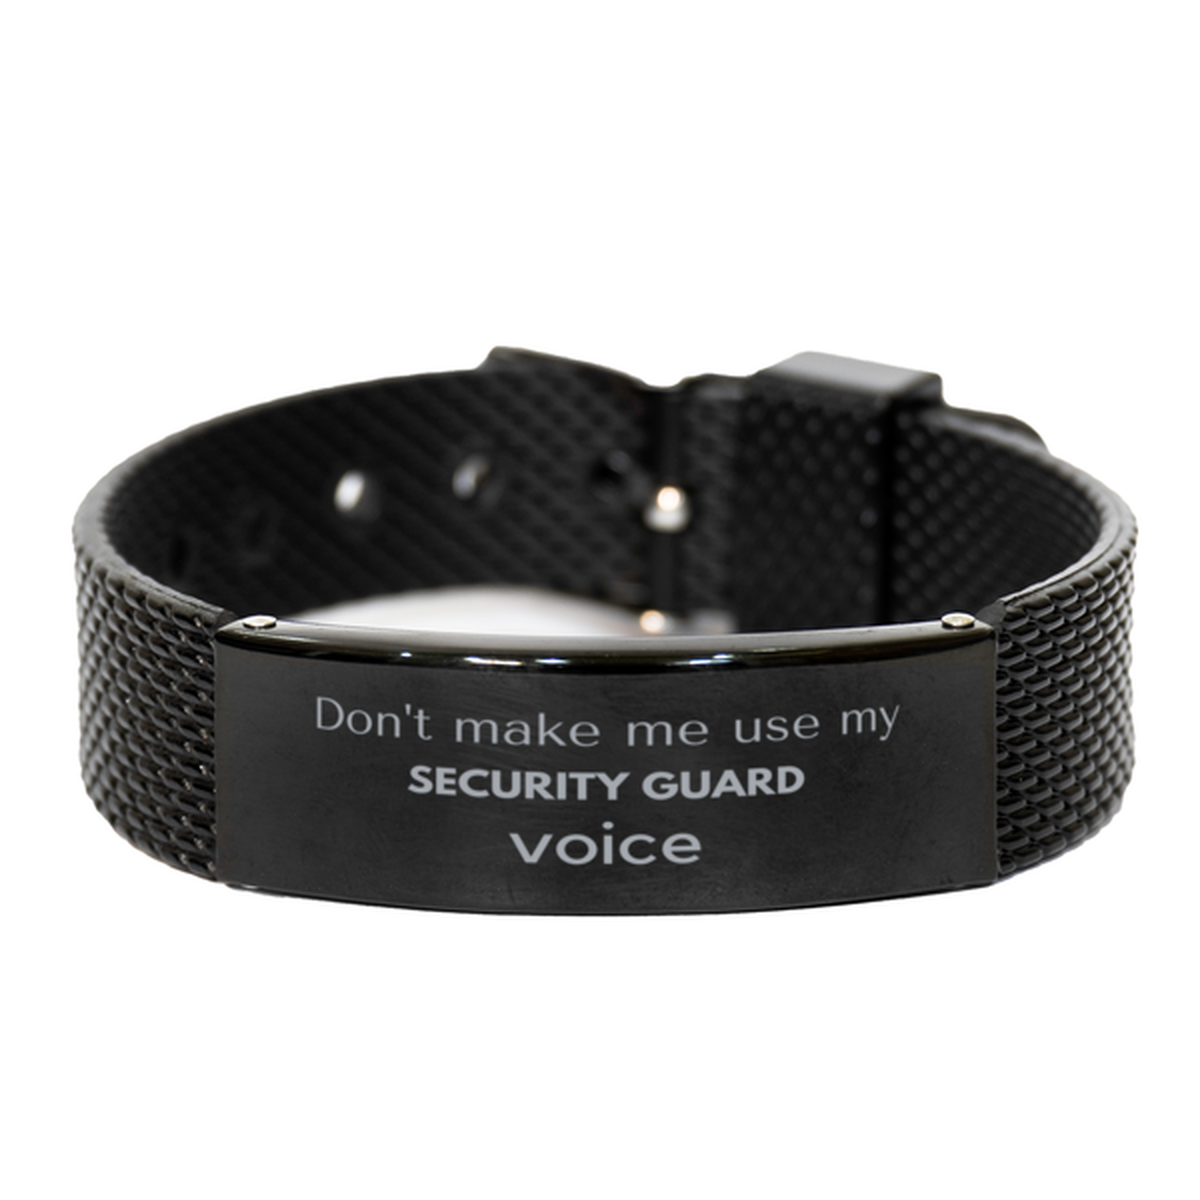 Don't make me use my Security Guard voice, Sarcasm Security Guard Gifts, Christmas Security Guard Black Shark Mesh Bracelet Birthday Unique Gifts For Security Guard Coworkers, Men, Women, Colleague, Friends